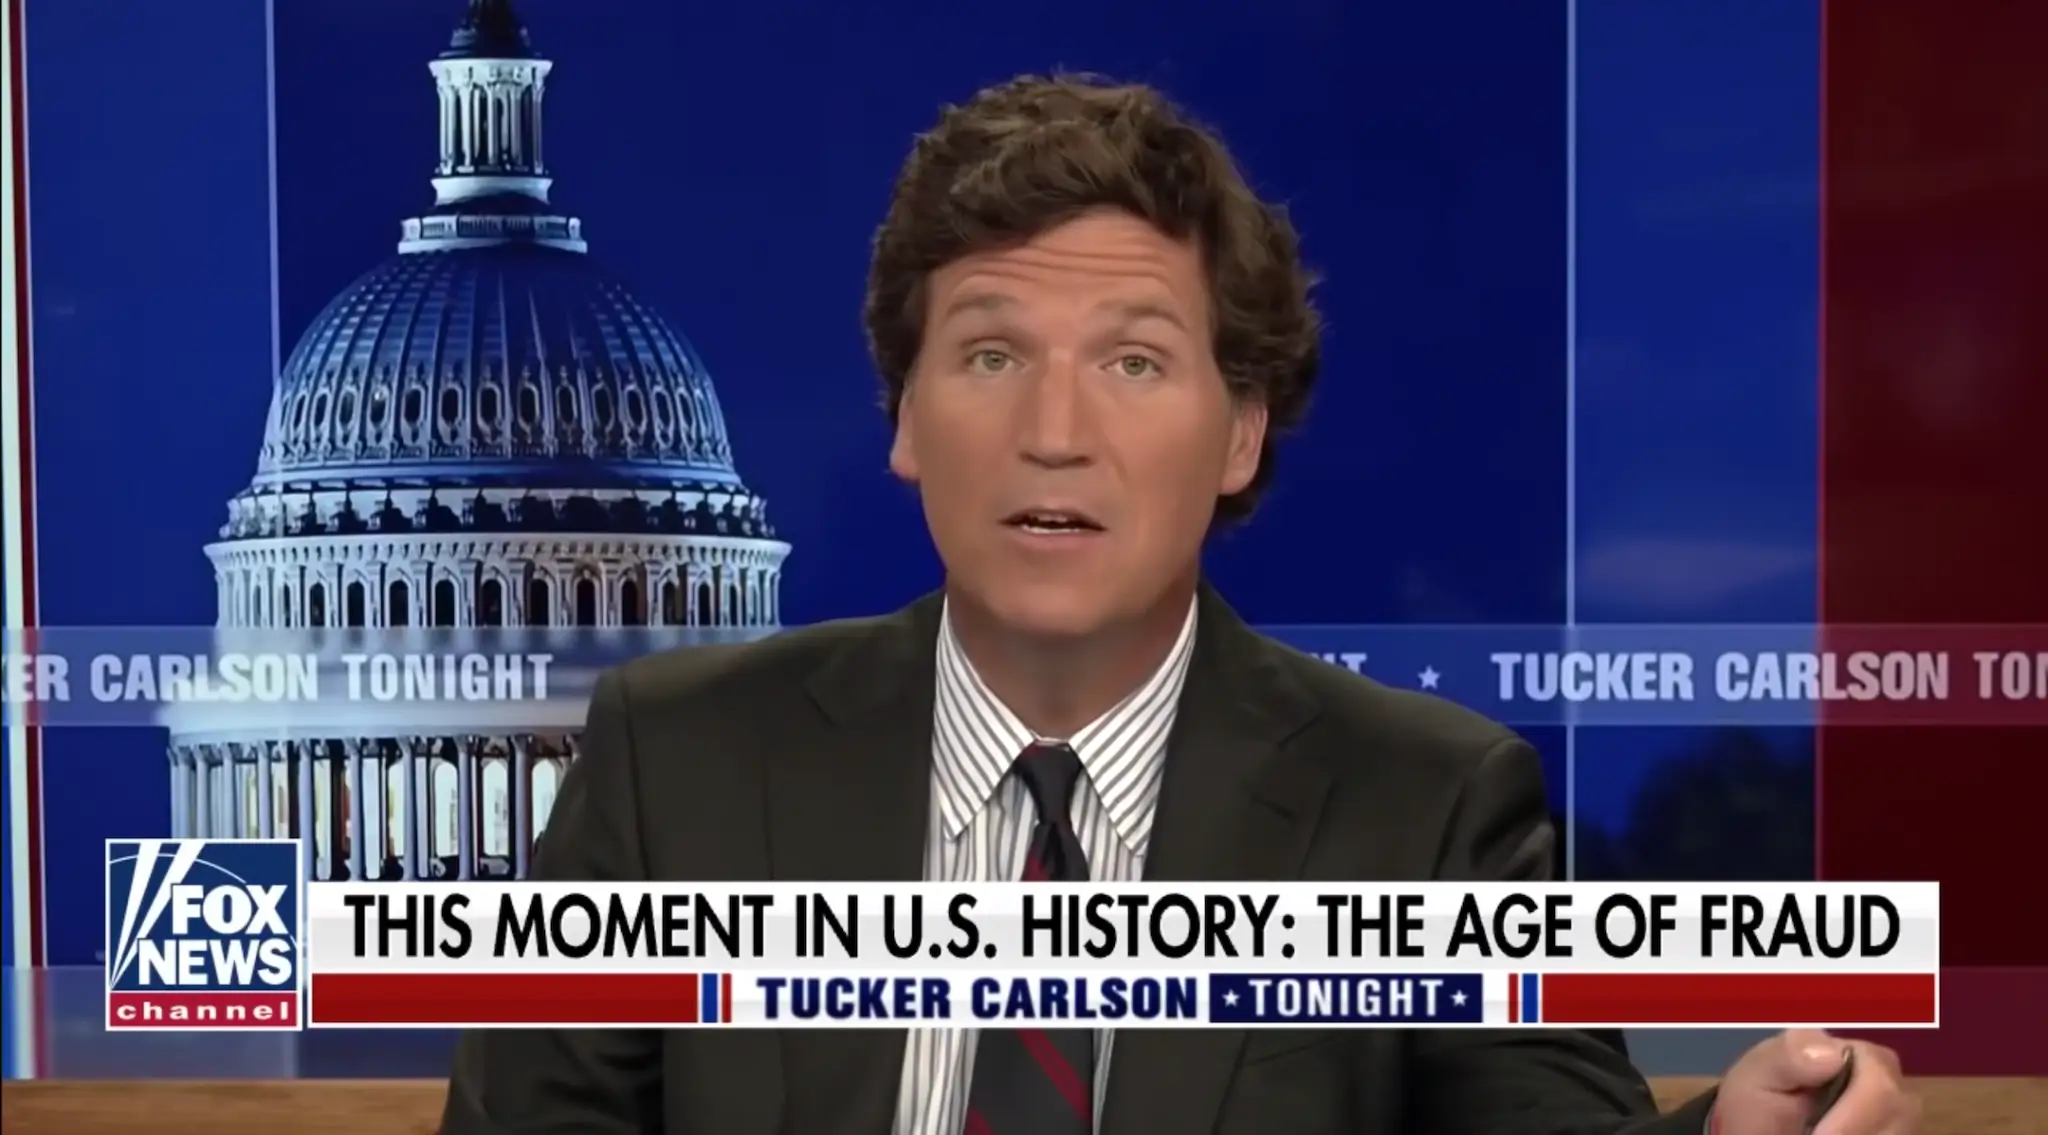 Tucker Carlson speaking on Fox News on April 9, 2021. Carlson’s comments about immigrants prompted the Anti-Defamation League to call for his firing.